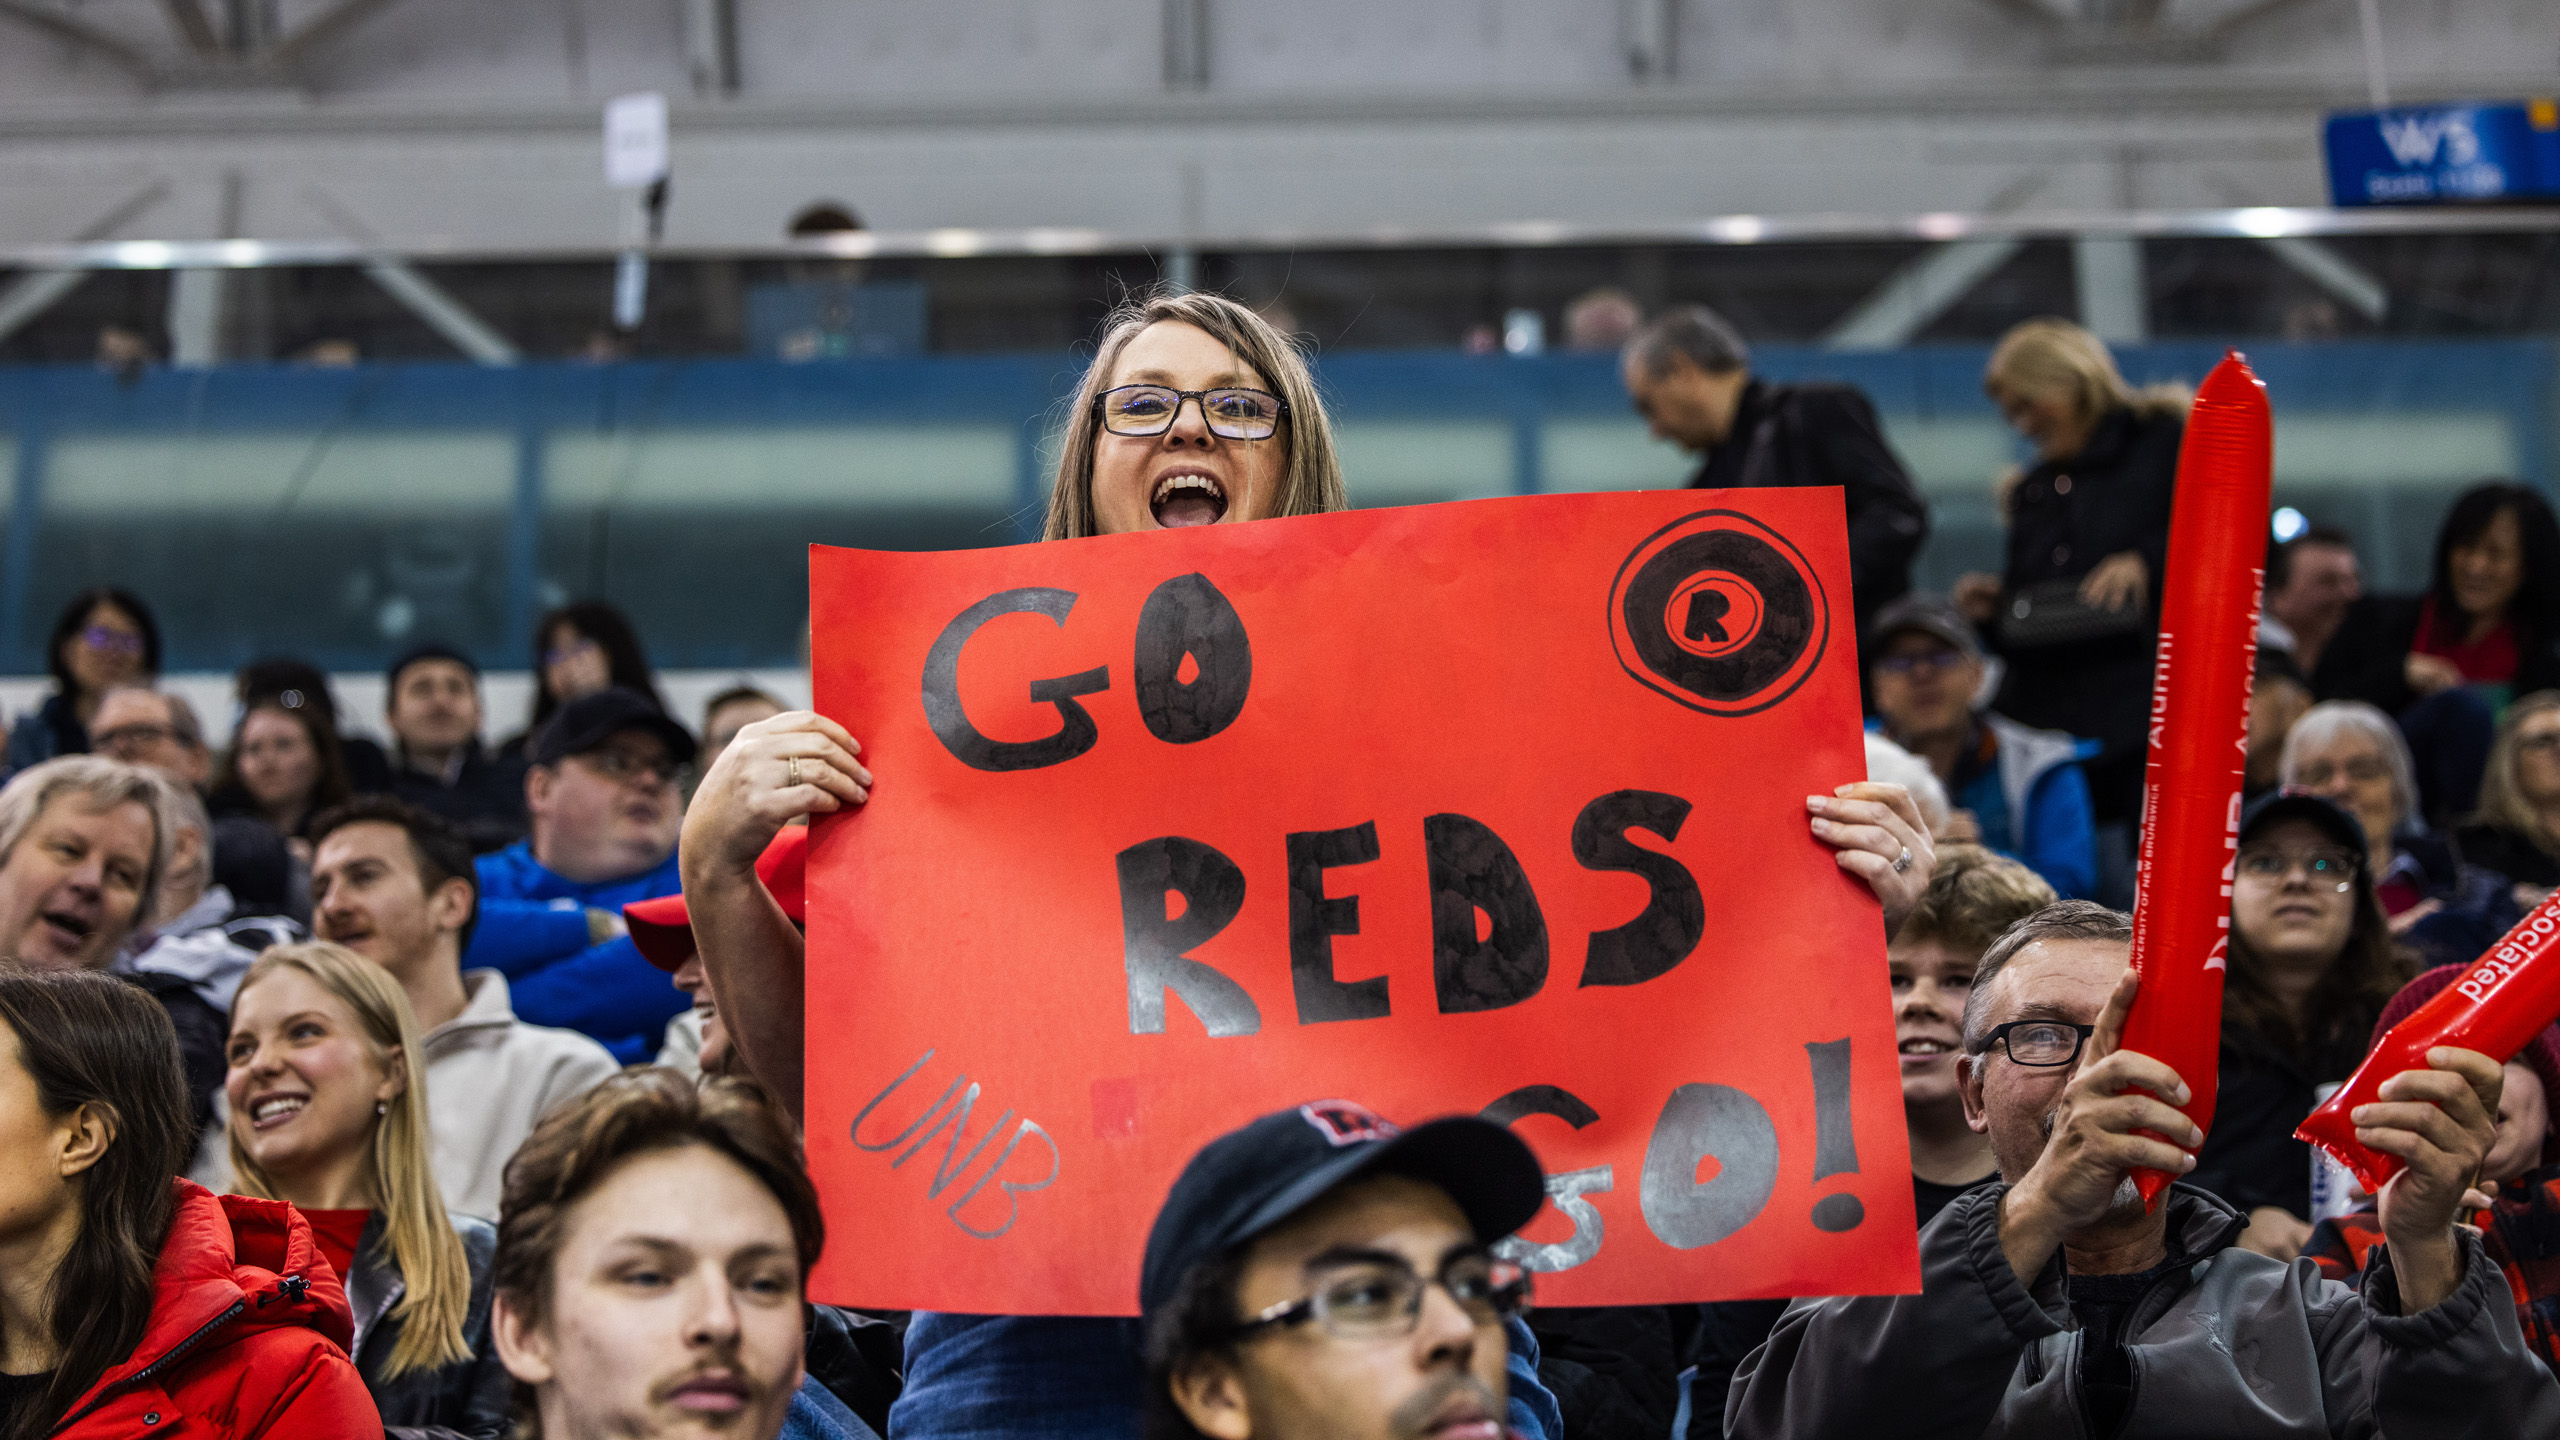 A UNB fan holds a sign that says "Go Reds Go"